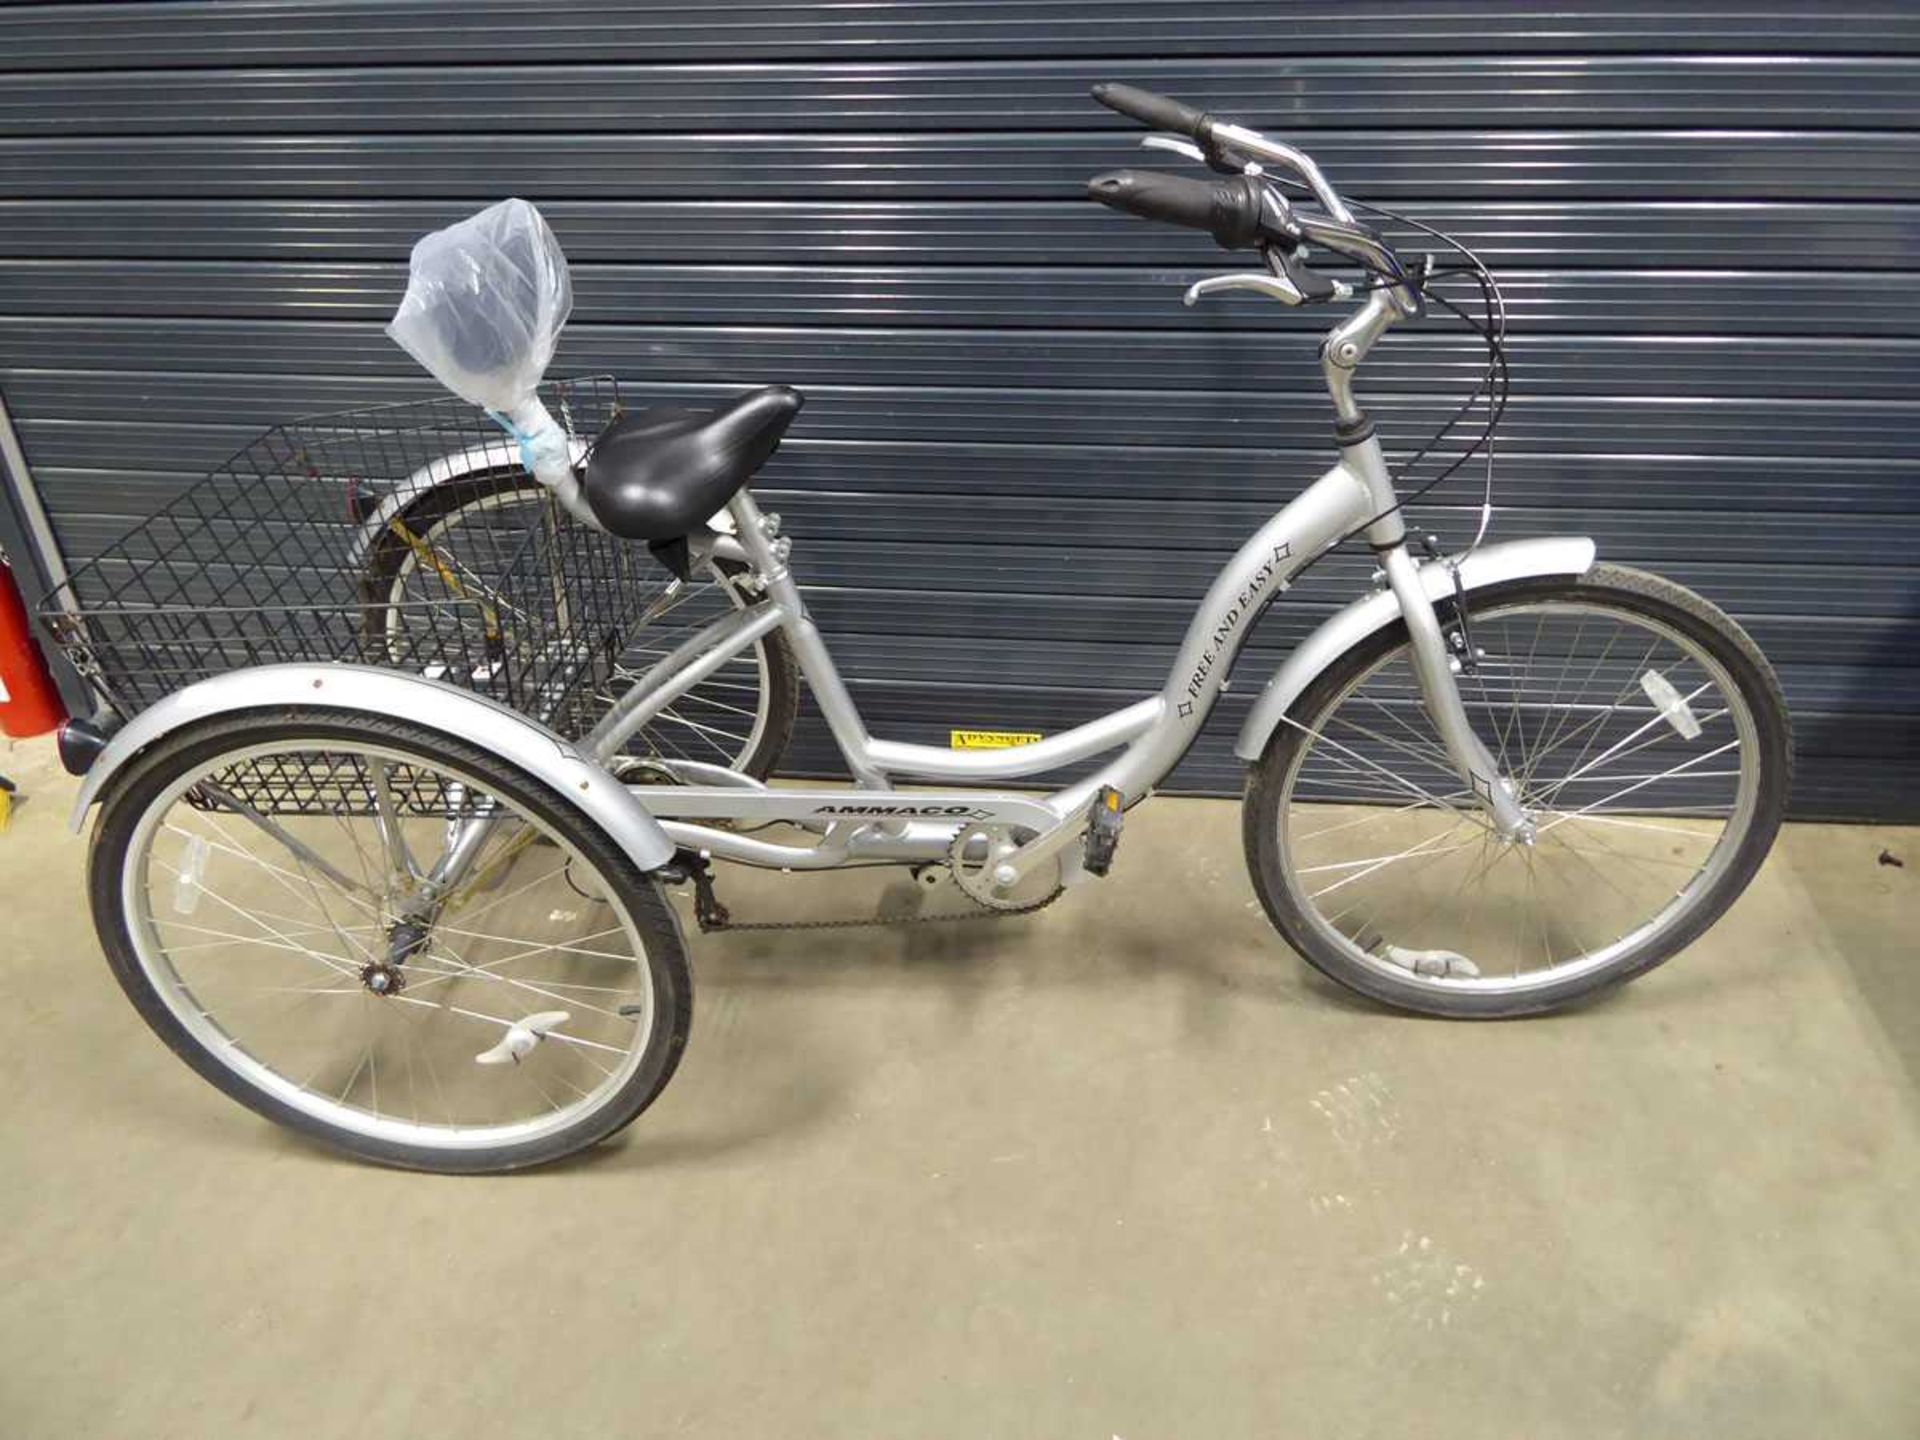 Ammaco 3 wheel tricycle